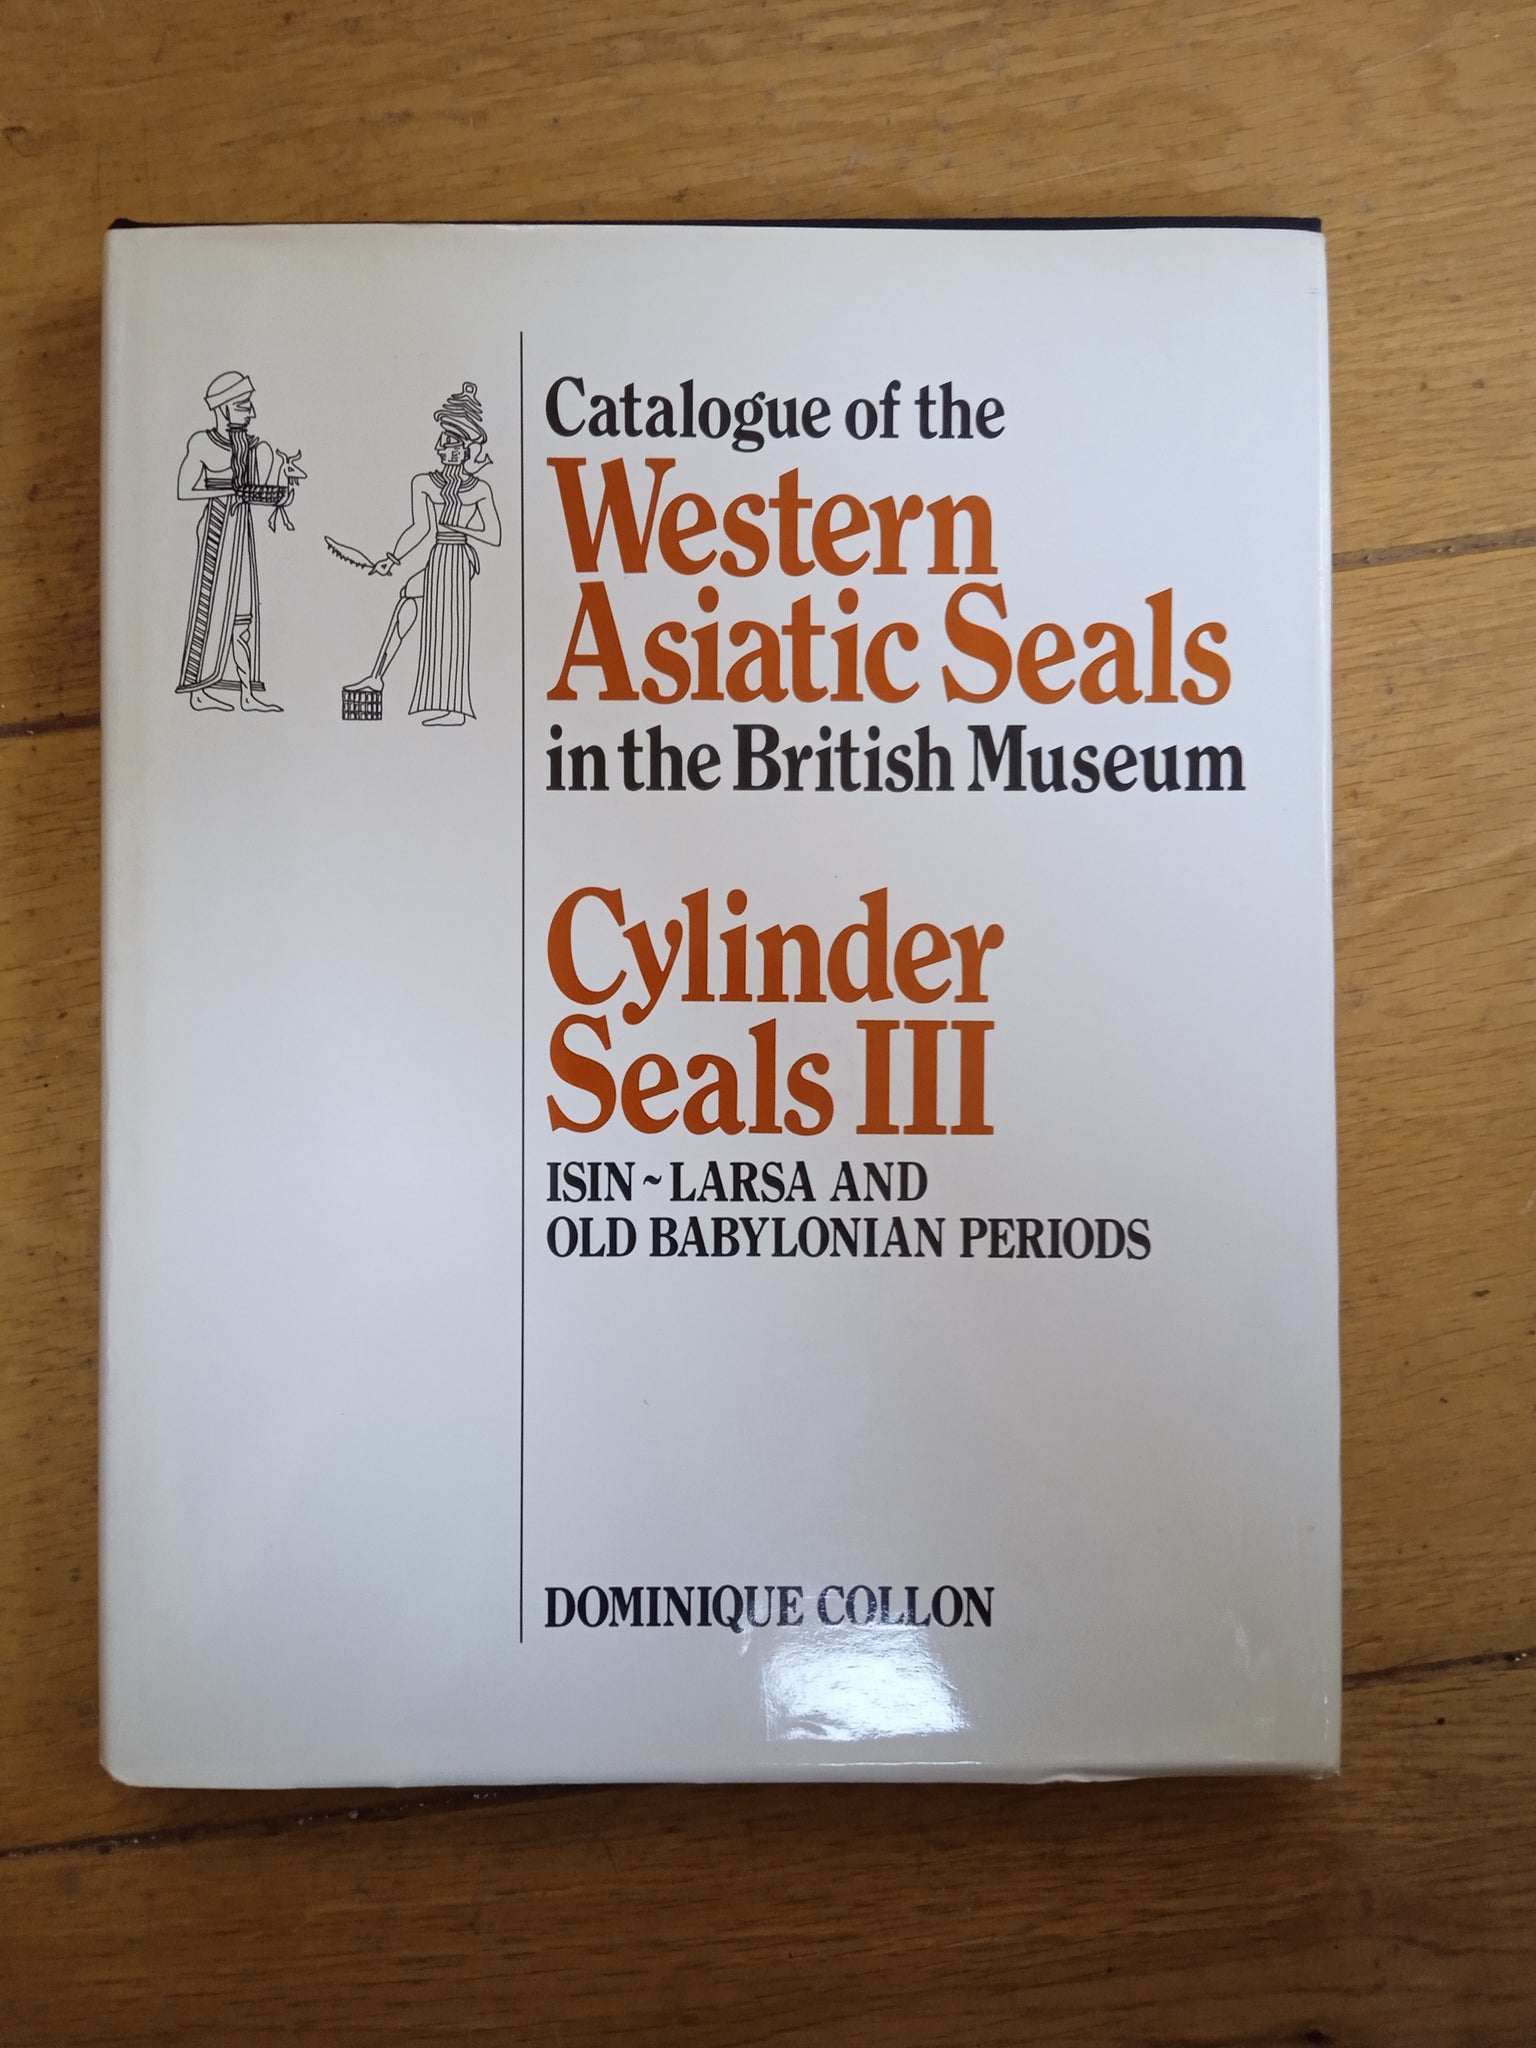 Catalogue of the Western Asiatic Seals in the British Museum - Cylinder Seals III - Isin Larsa and Old Babylonian Periods.